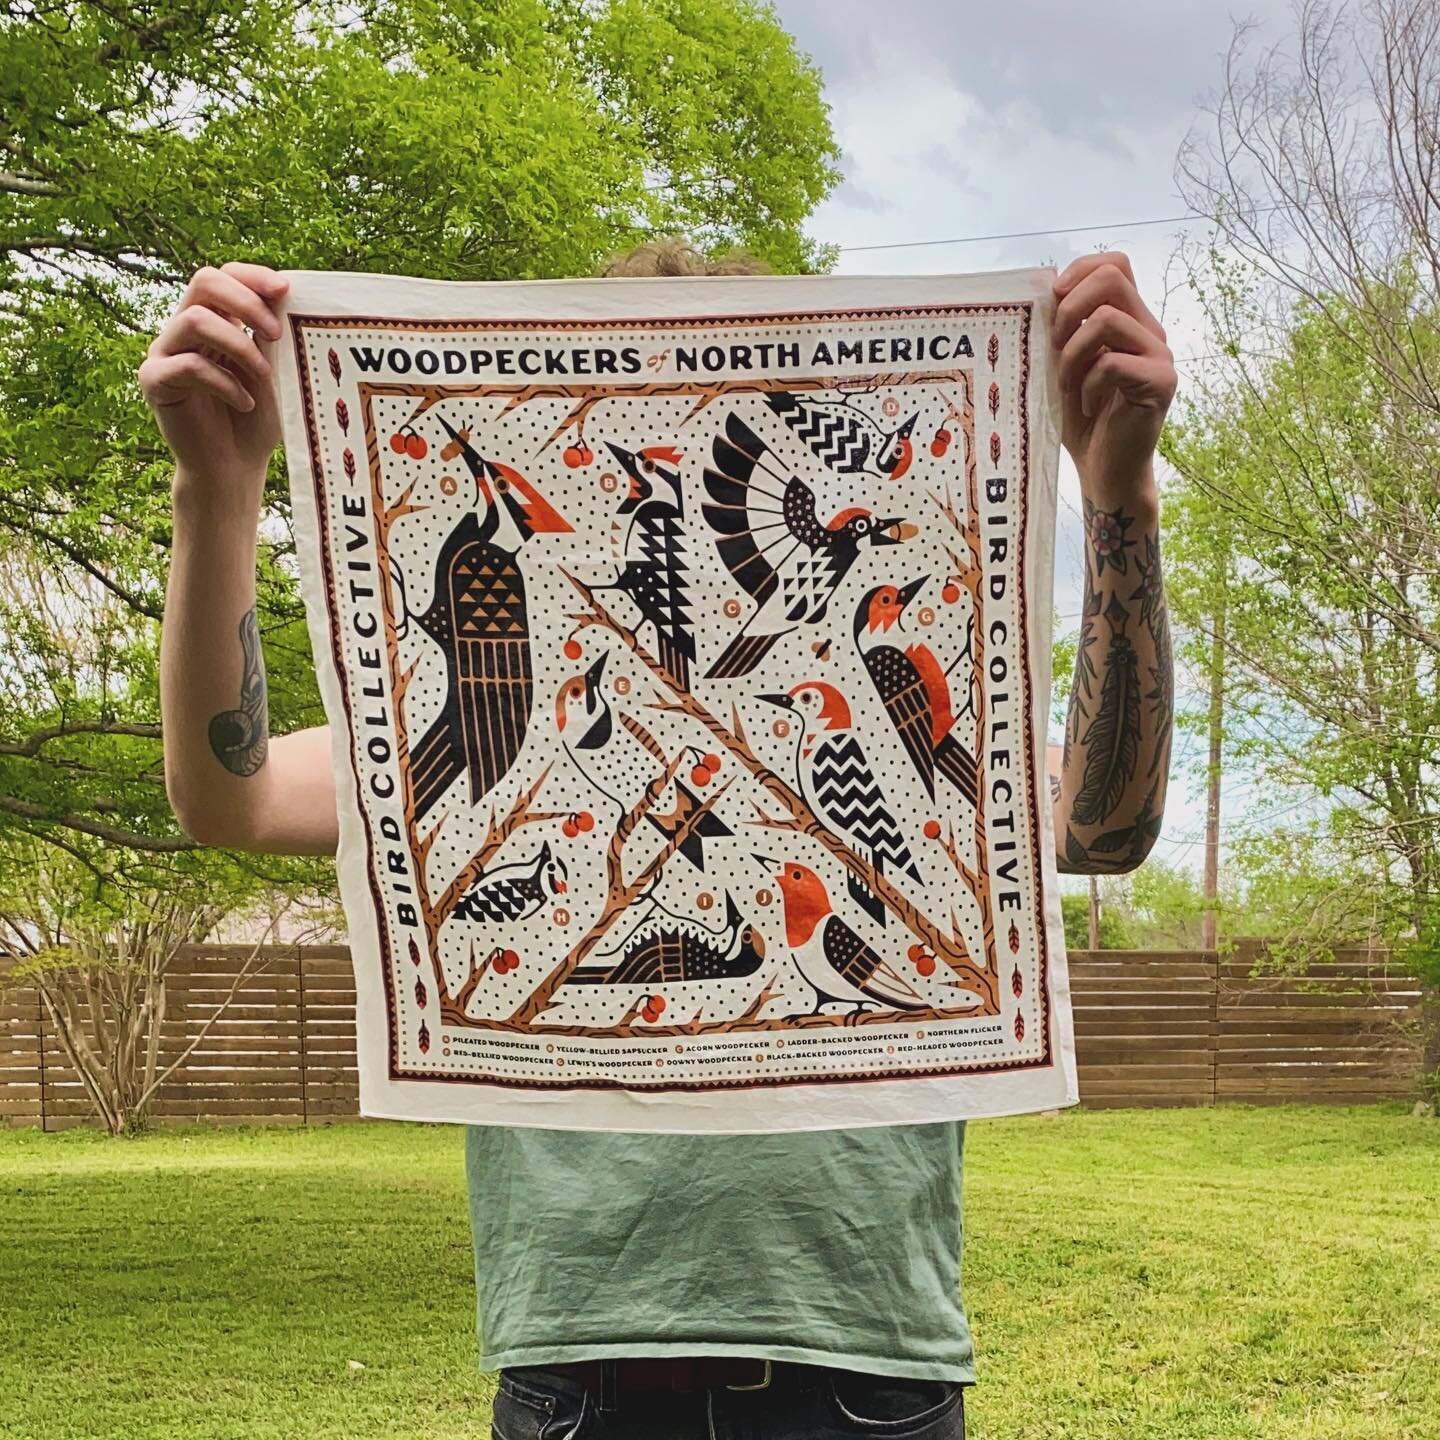 some product shots of my recent woodpecker collab with @birdcollective. I seriously love this shirt, if you see me wearing it ask me about my fav pecker (spoiler it&rsquo;s red-bellied)
.
.
.
.
.
#birdcollective #birding #illustrator #shirtdesign #ba